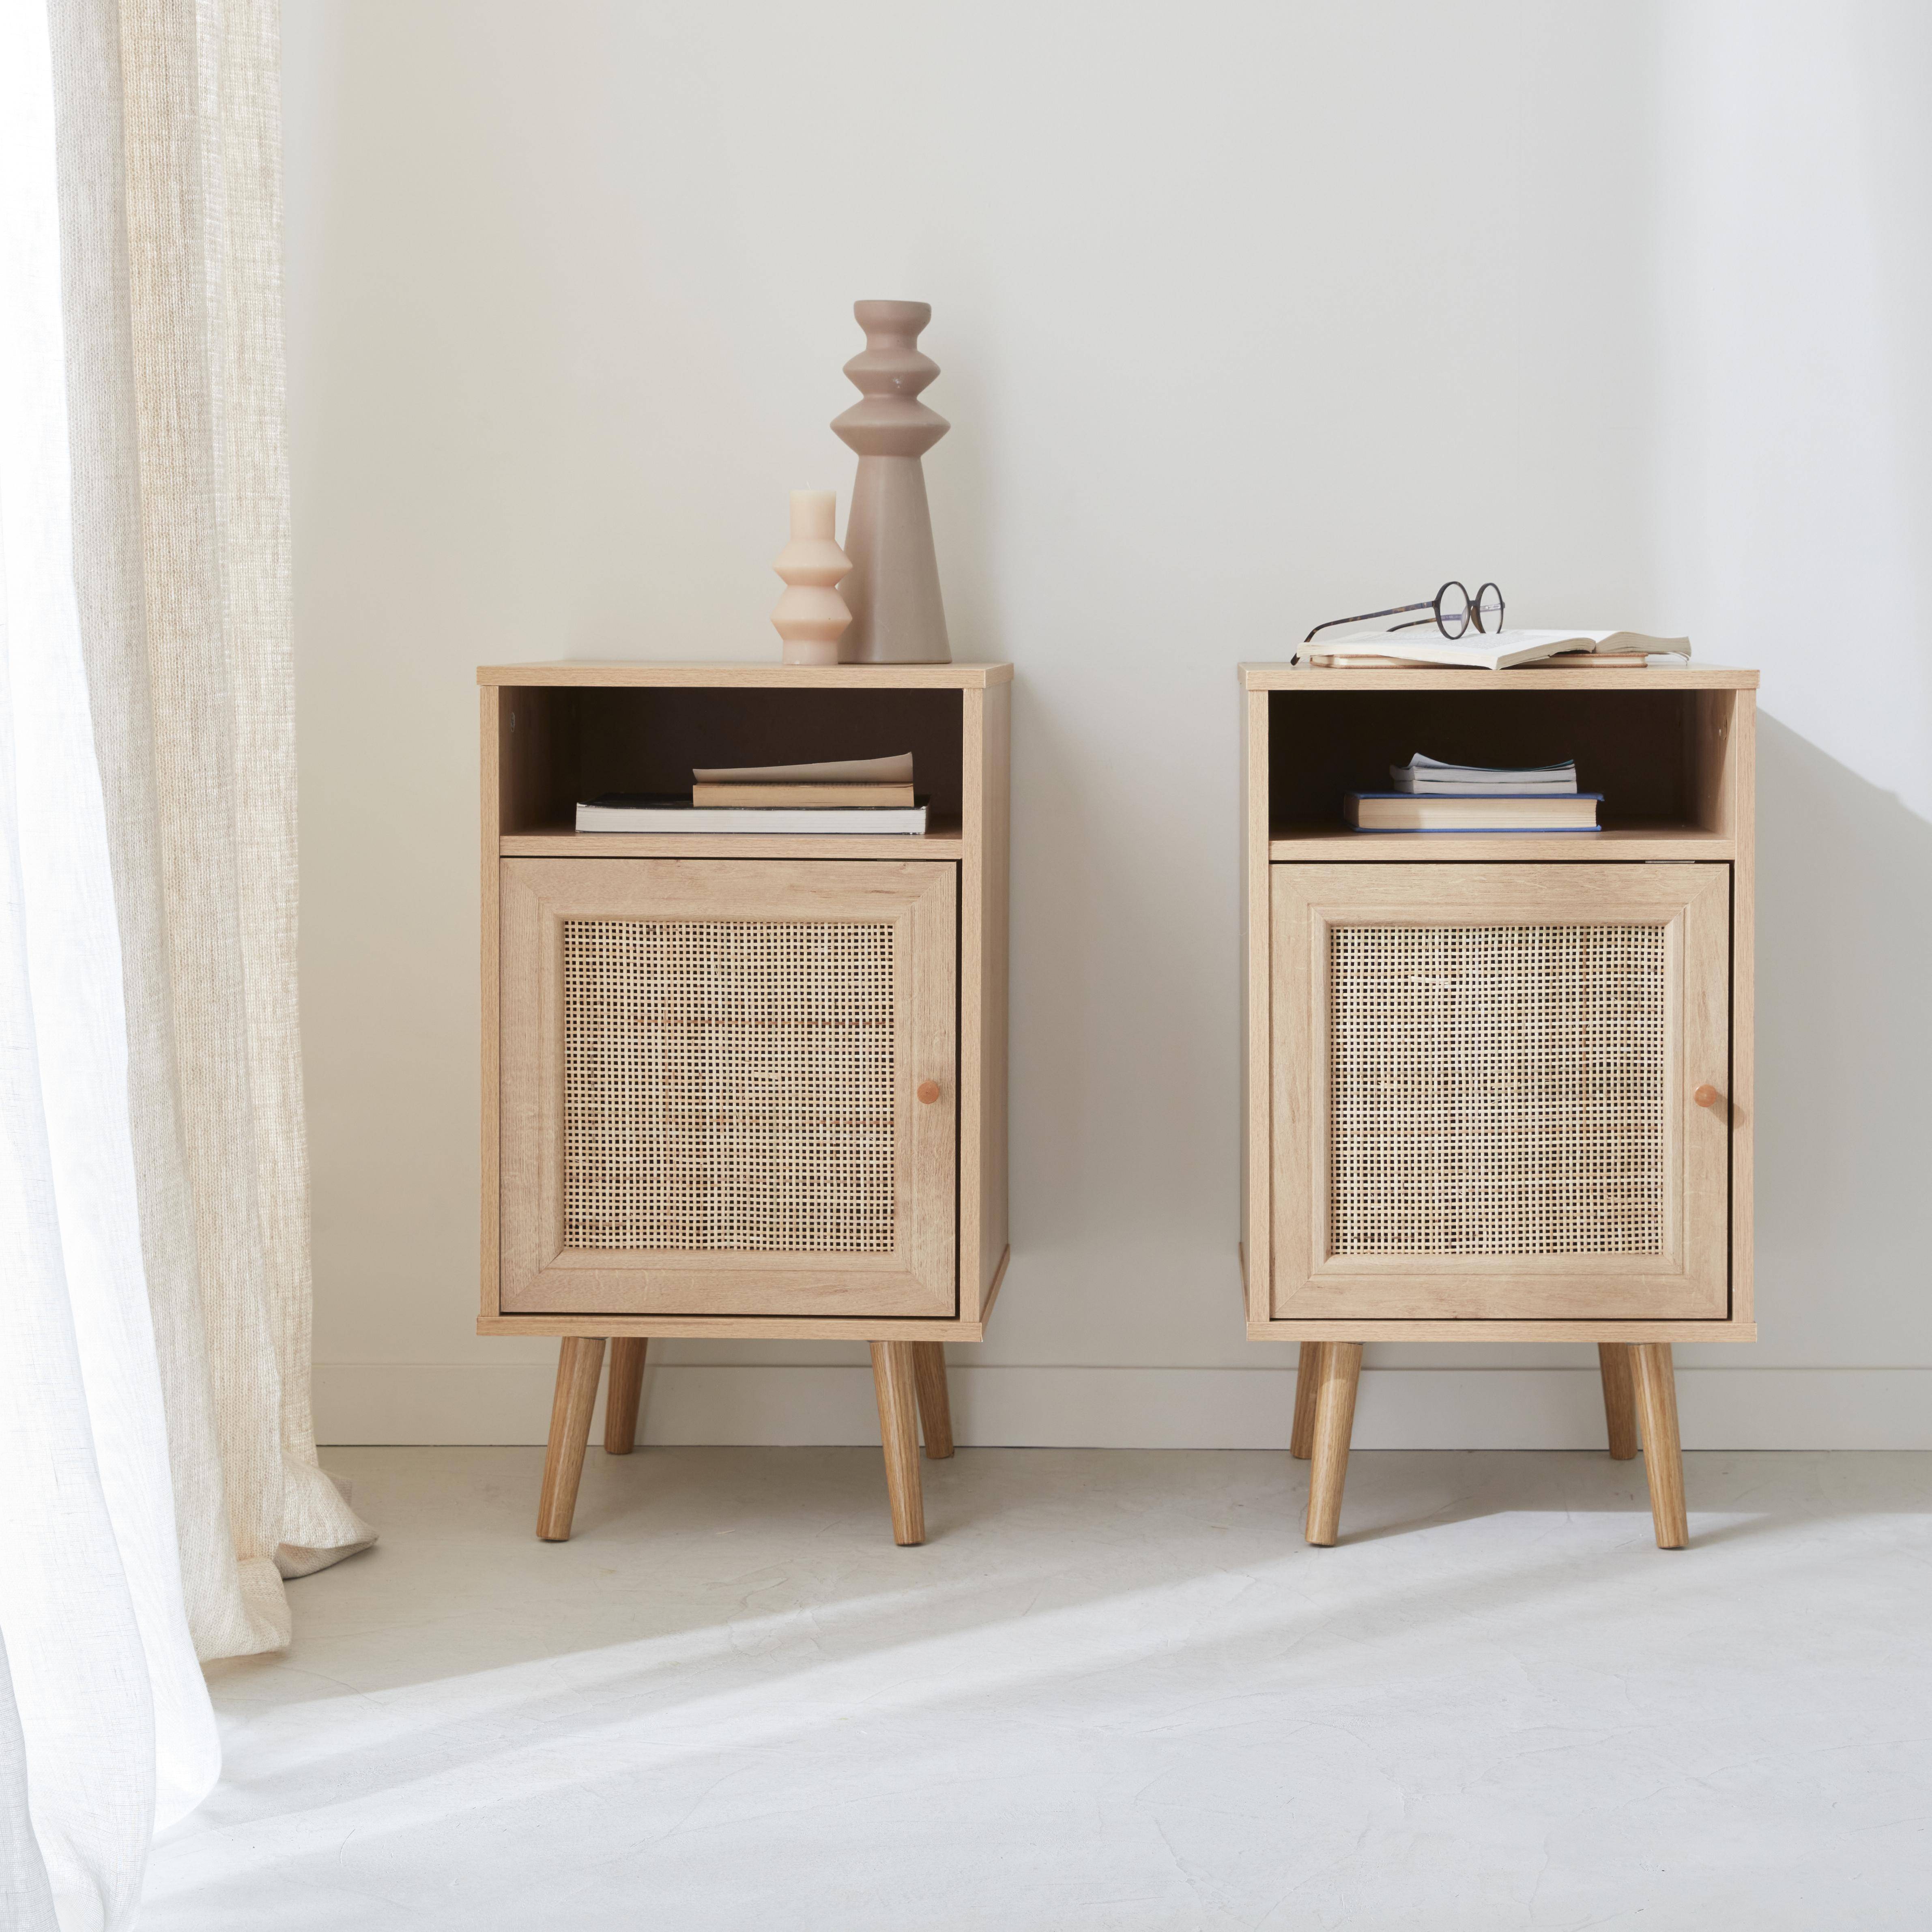 Pair of Scandi-style wood and cane rattan bedside tables with cupboard, 40x39x70cm - Boheme - Natural Wood colour,sweeek,Photo1